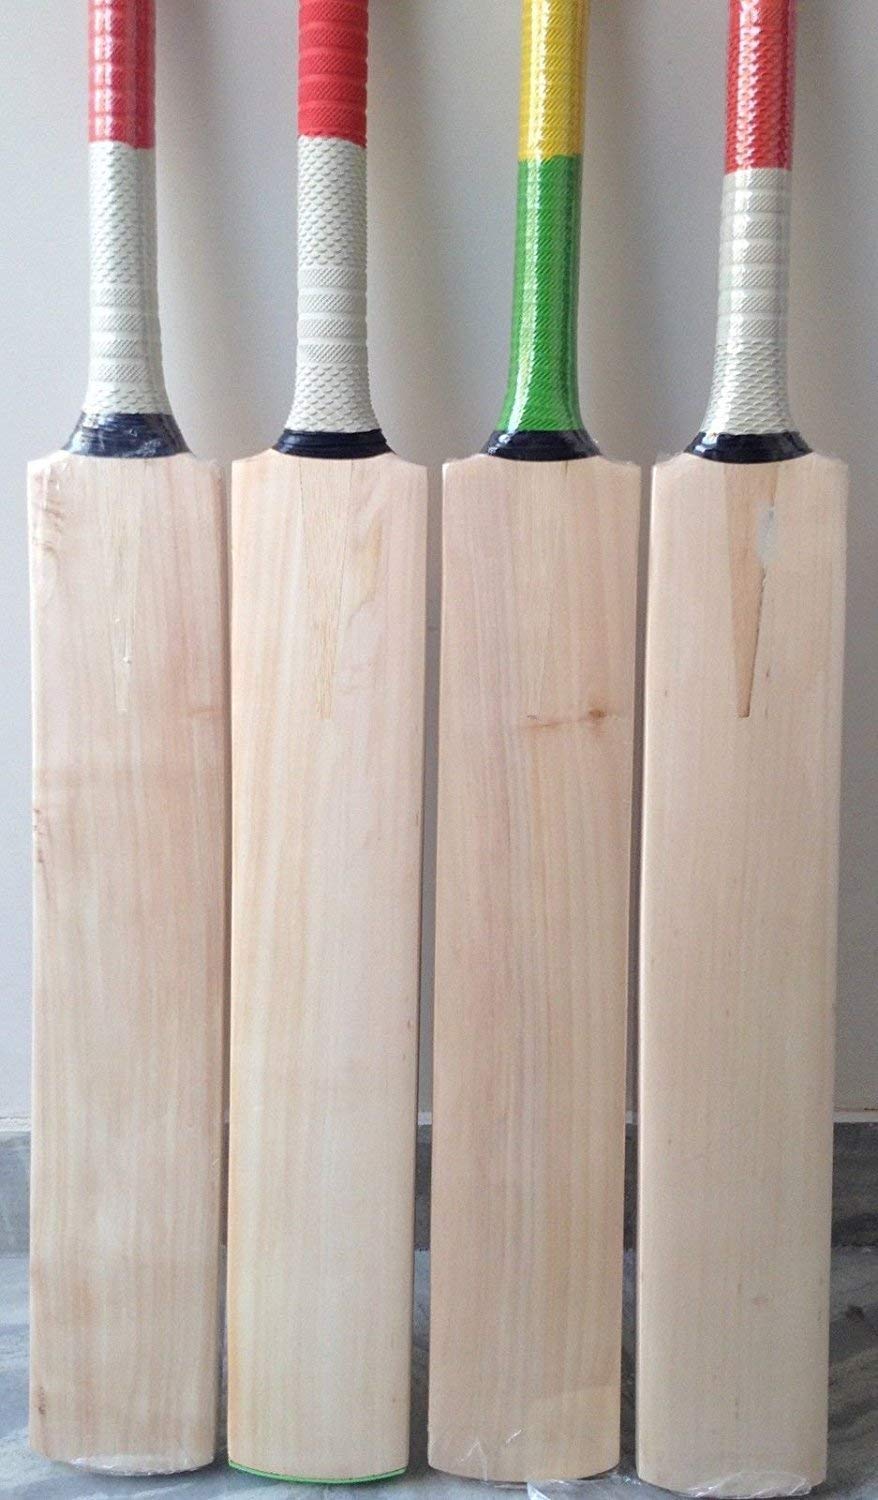 Group of four tennis cricket bats with multi coloured rubber grips. These cricket bats are specially made for hard tennis cricket bat.